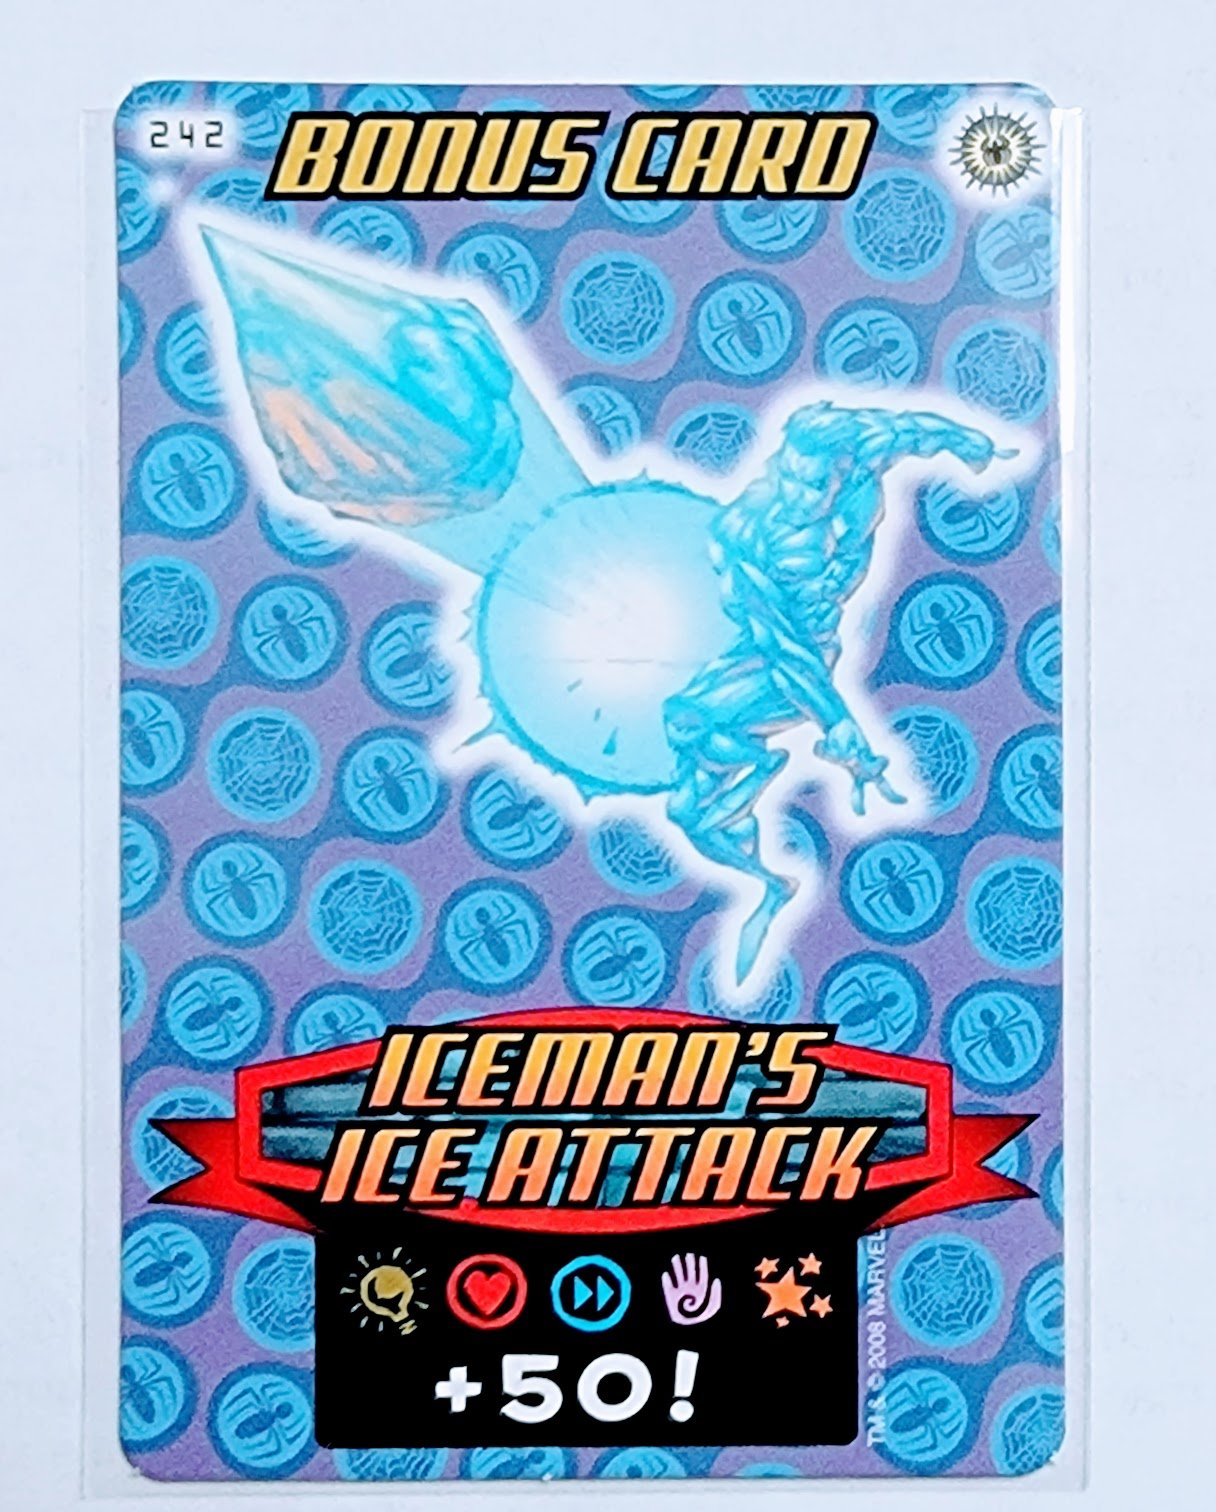 2008 Spiderman Heroes and Villains Iceman's Ice Attack Bonus Card #242 Marvel Booster Trading Card UPTI simple Xclusive Collectibles   